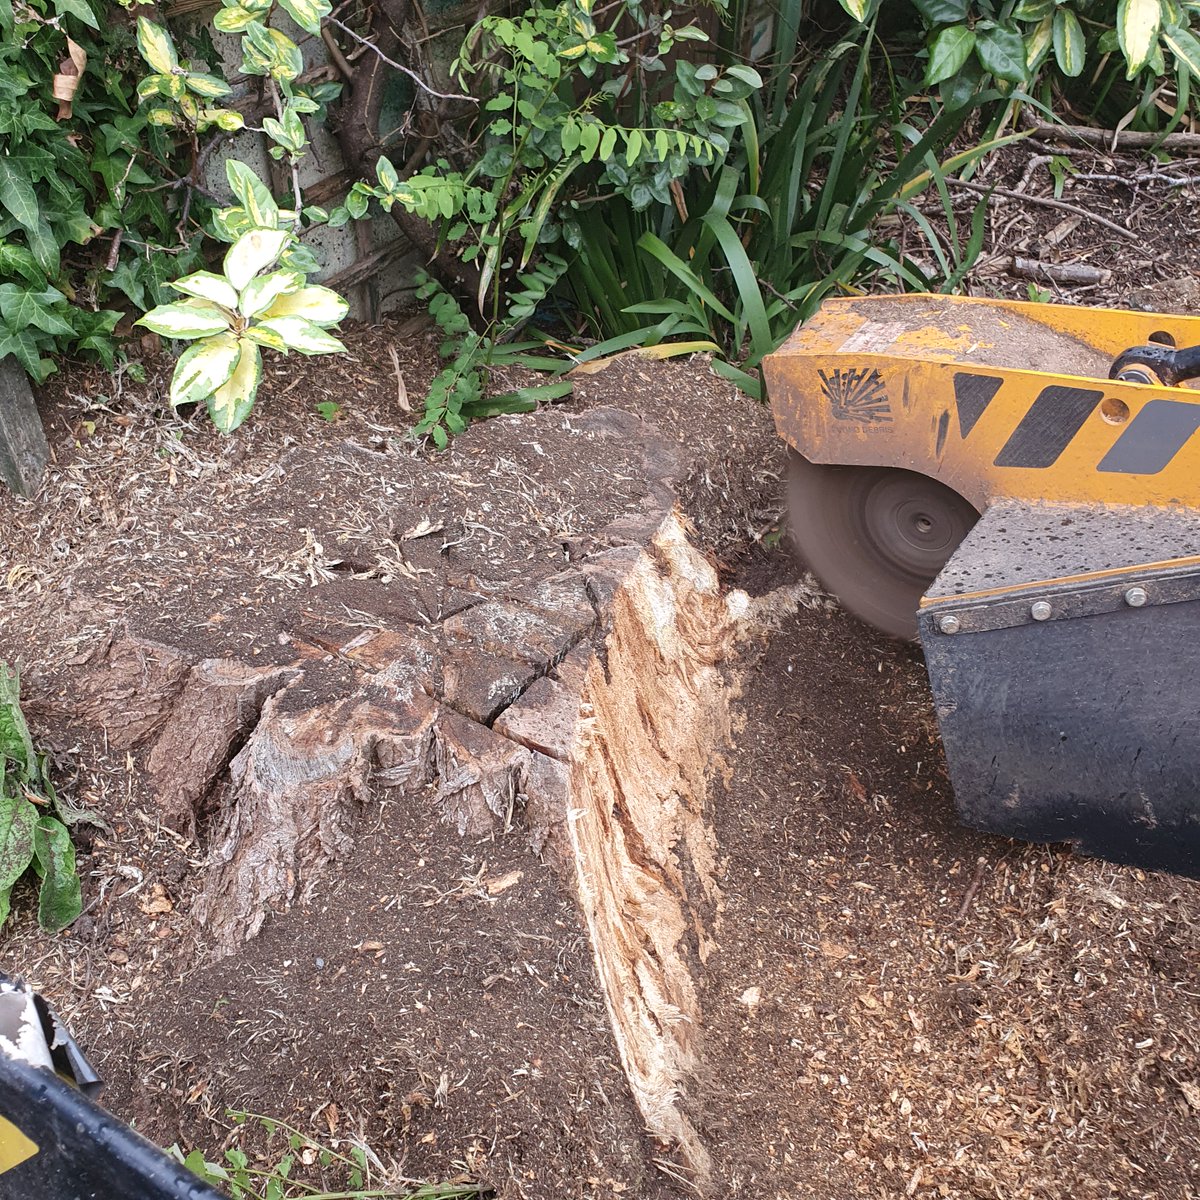 Tree stump grinding near Milton, Cambridge today. A large acacia tree stump was removed in preparation for a new larger garage. The tree stump was totally removed in preparation for the ground workers. #Milton #Cambridge #Cambridgeshire #stumpgrinder #treeroots #treestumpgrinding